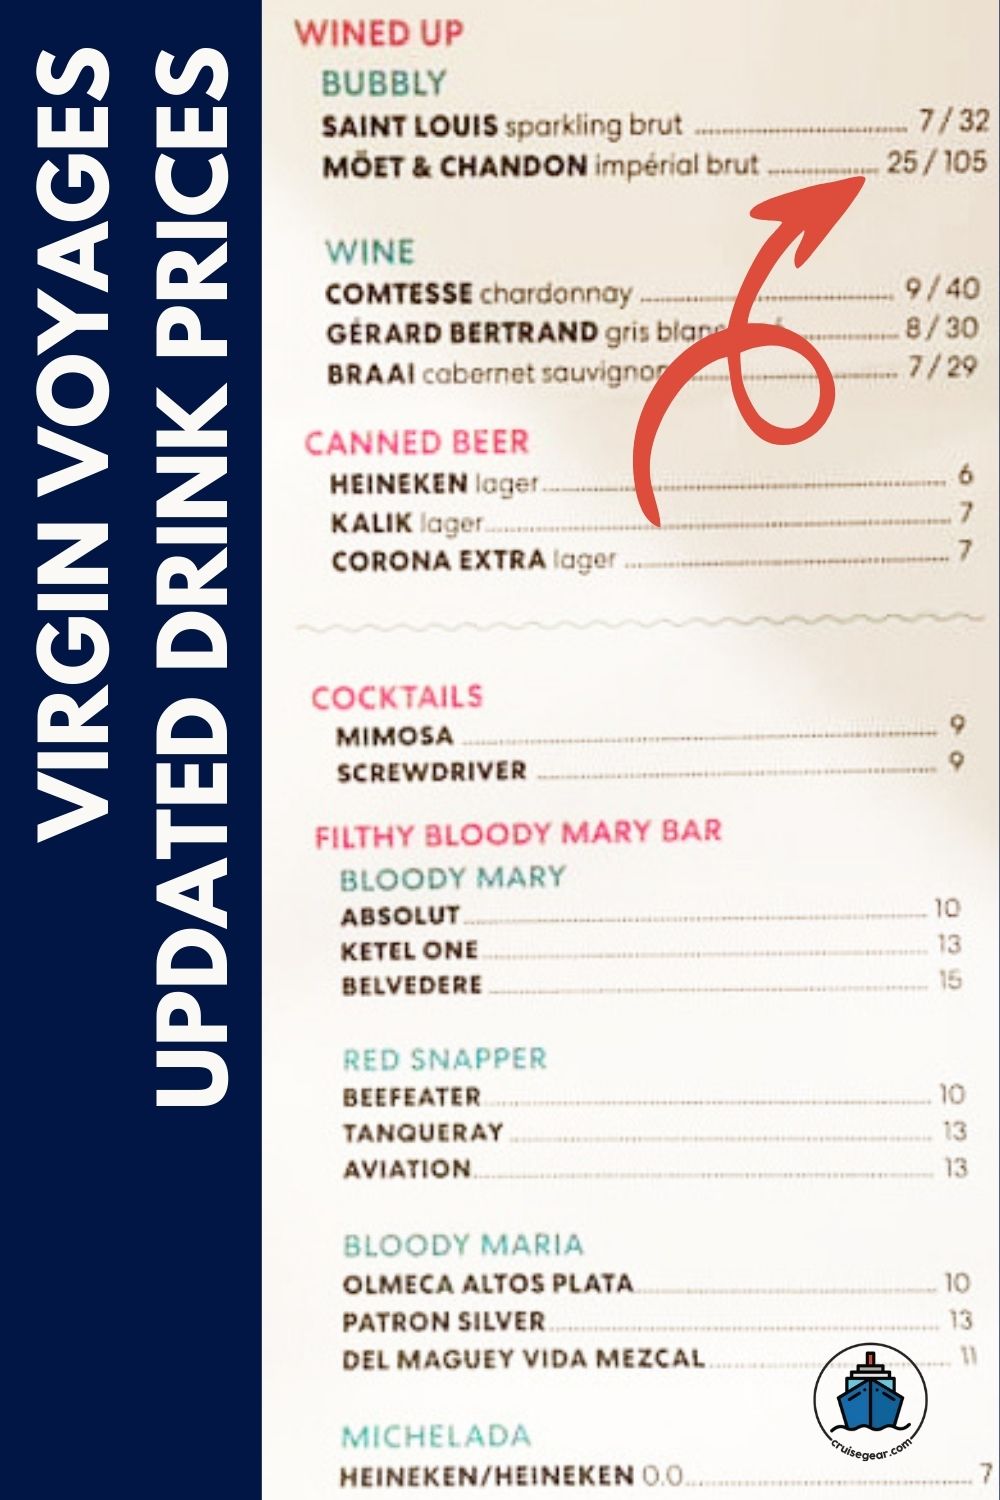 Updated virign voyages drink and bar prices